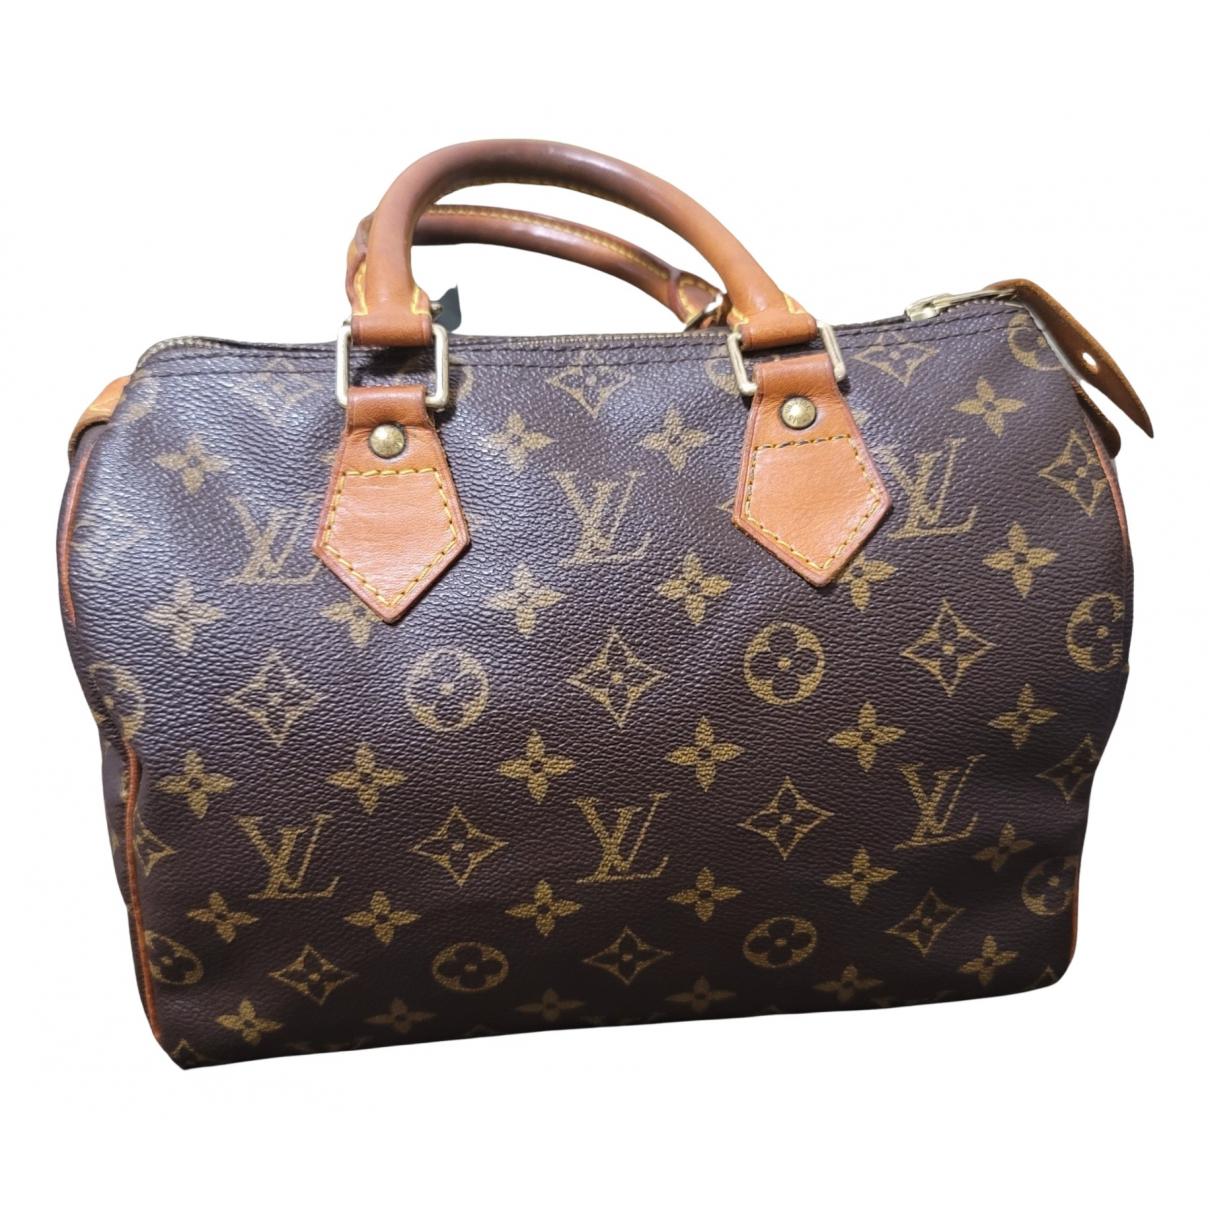 Louis Vuitton Speedy Doctor Bag Monogram Canvas And Leather 25 at